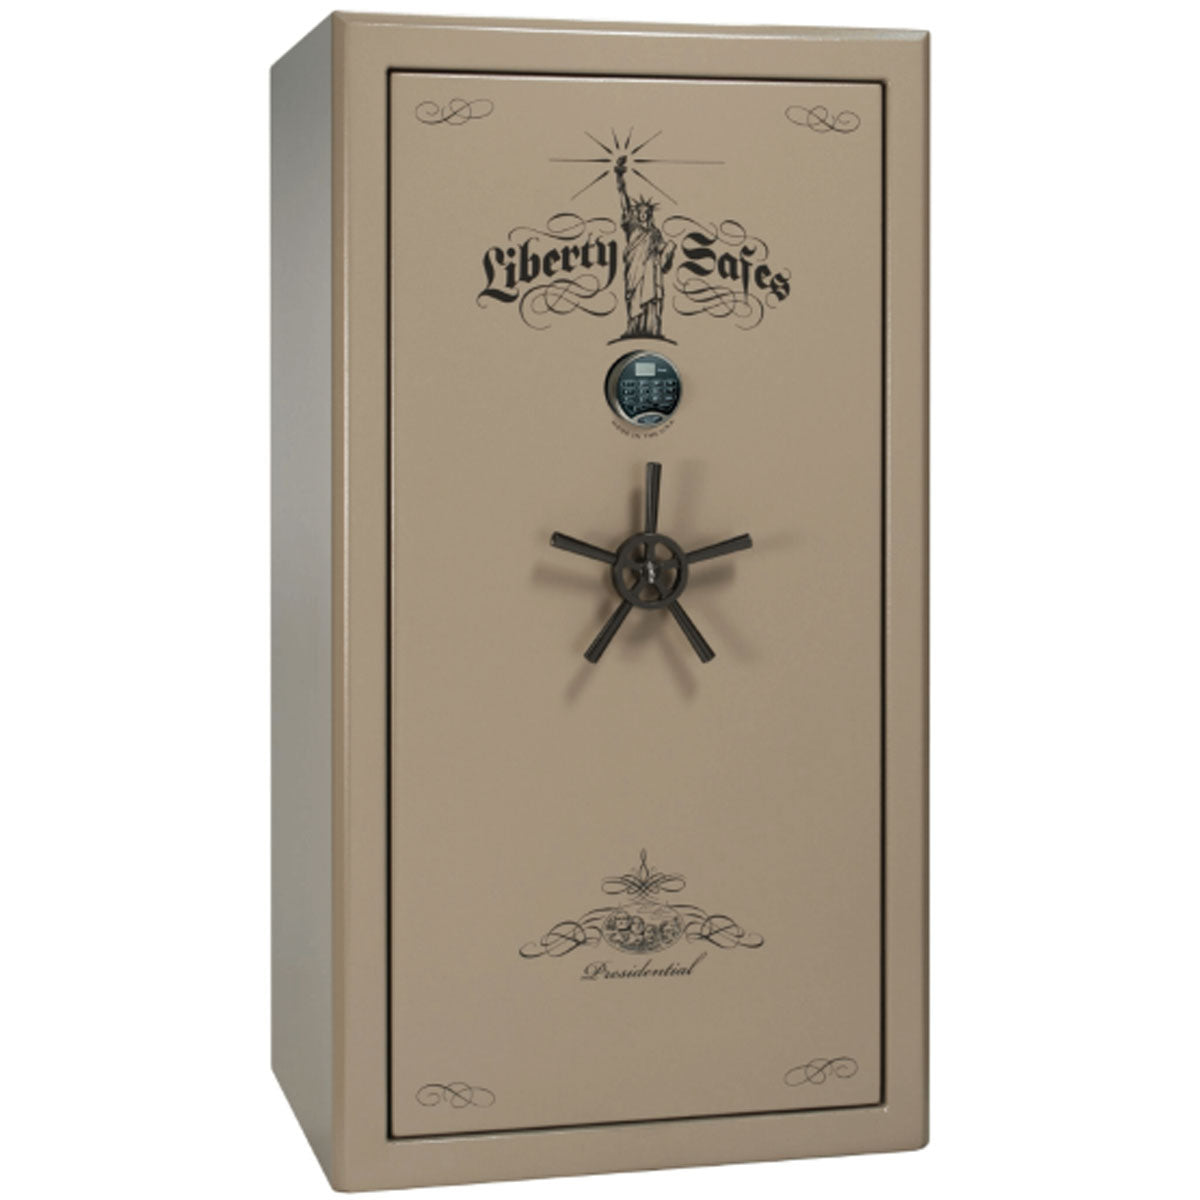 Liberty Safe Presidential 40 in Champagne Marble with Black Chrome Electronic Lock, closed door.